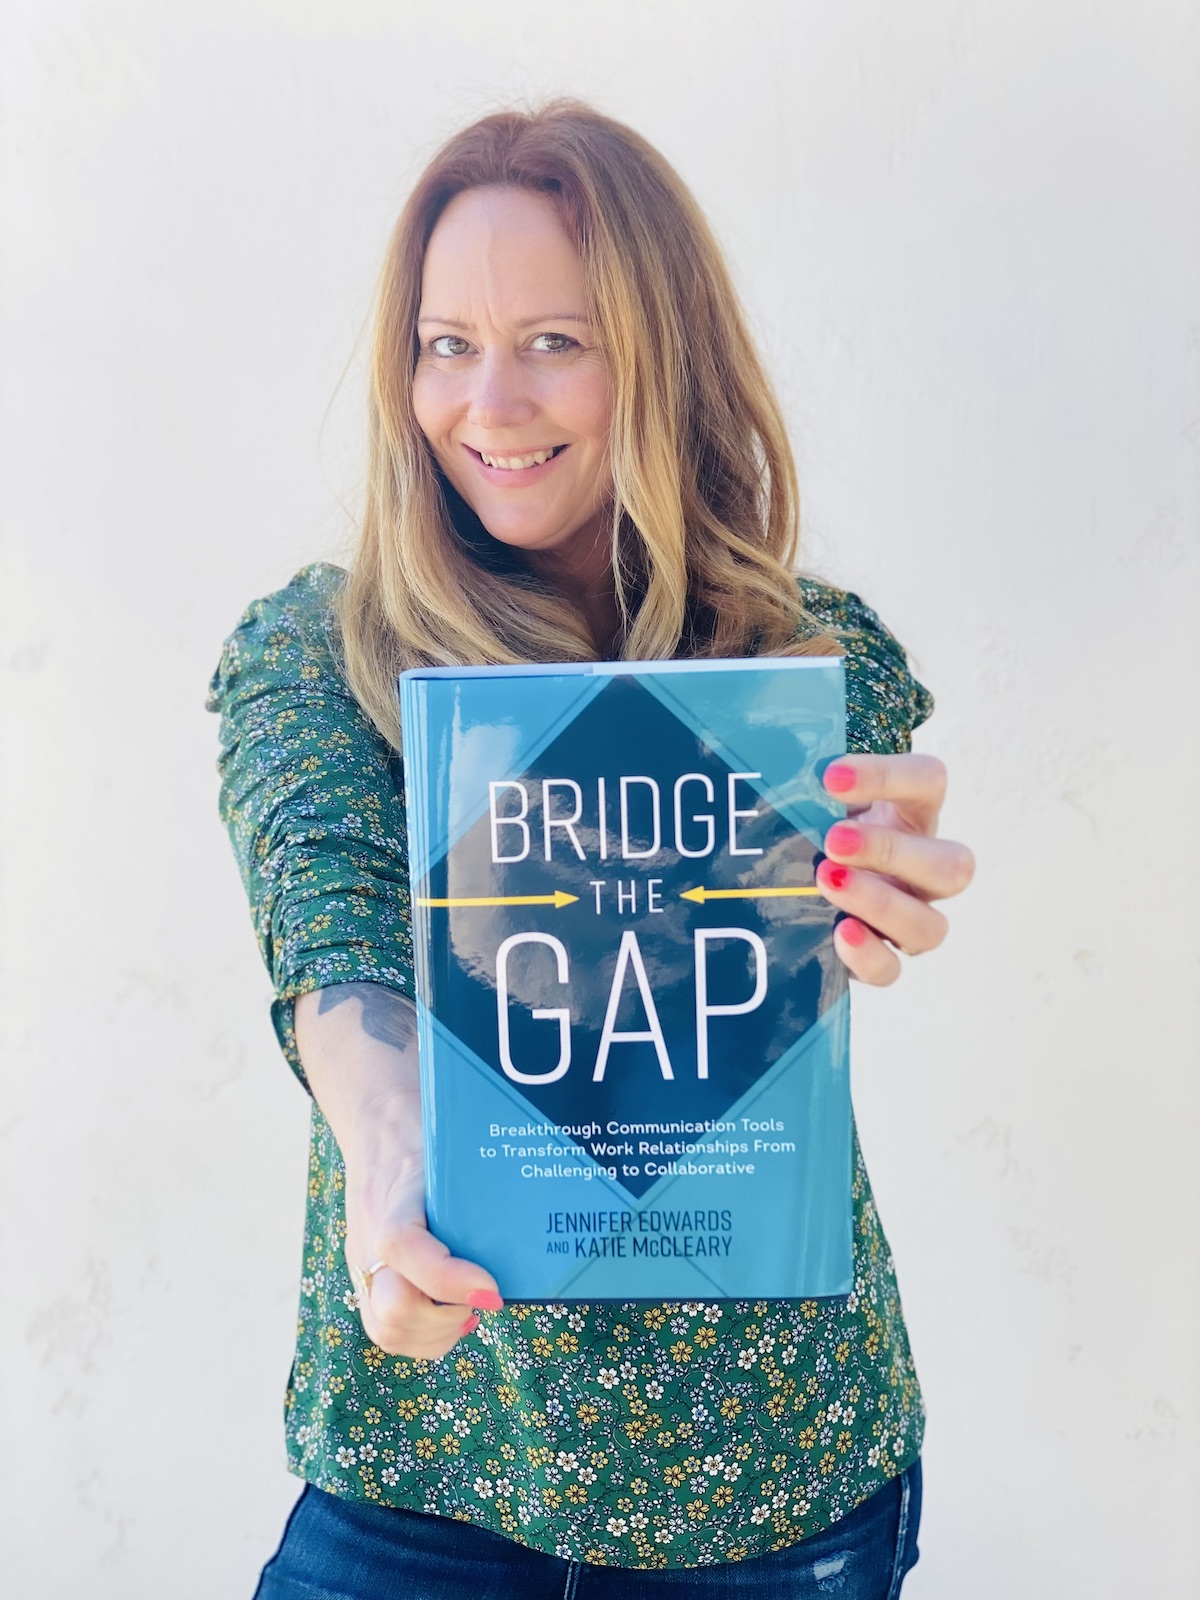 Katie McCleary holds new book "Bridge the Gap"